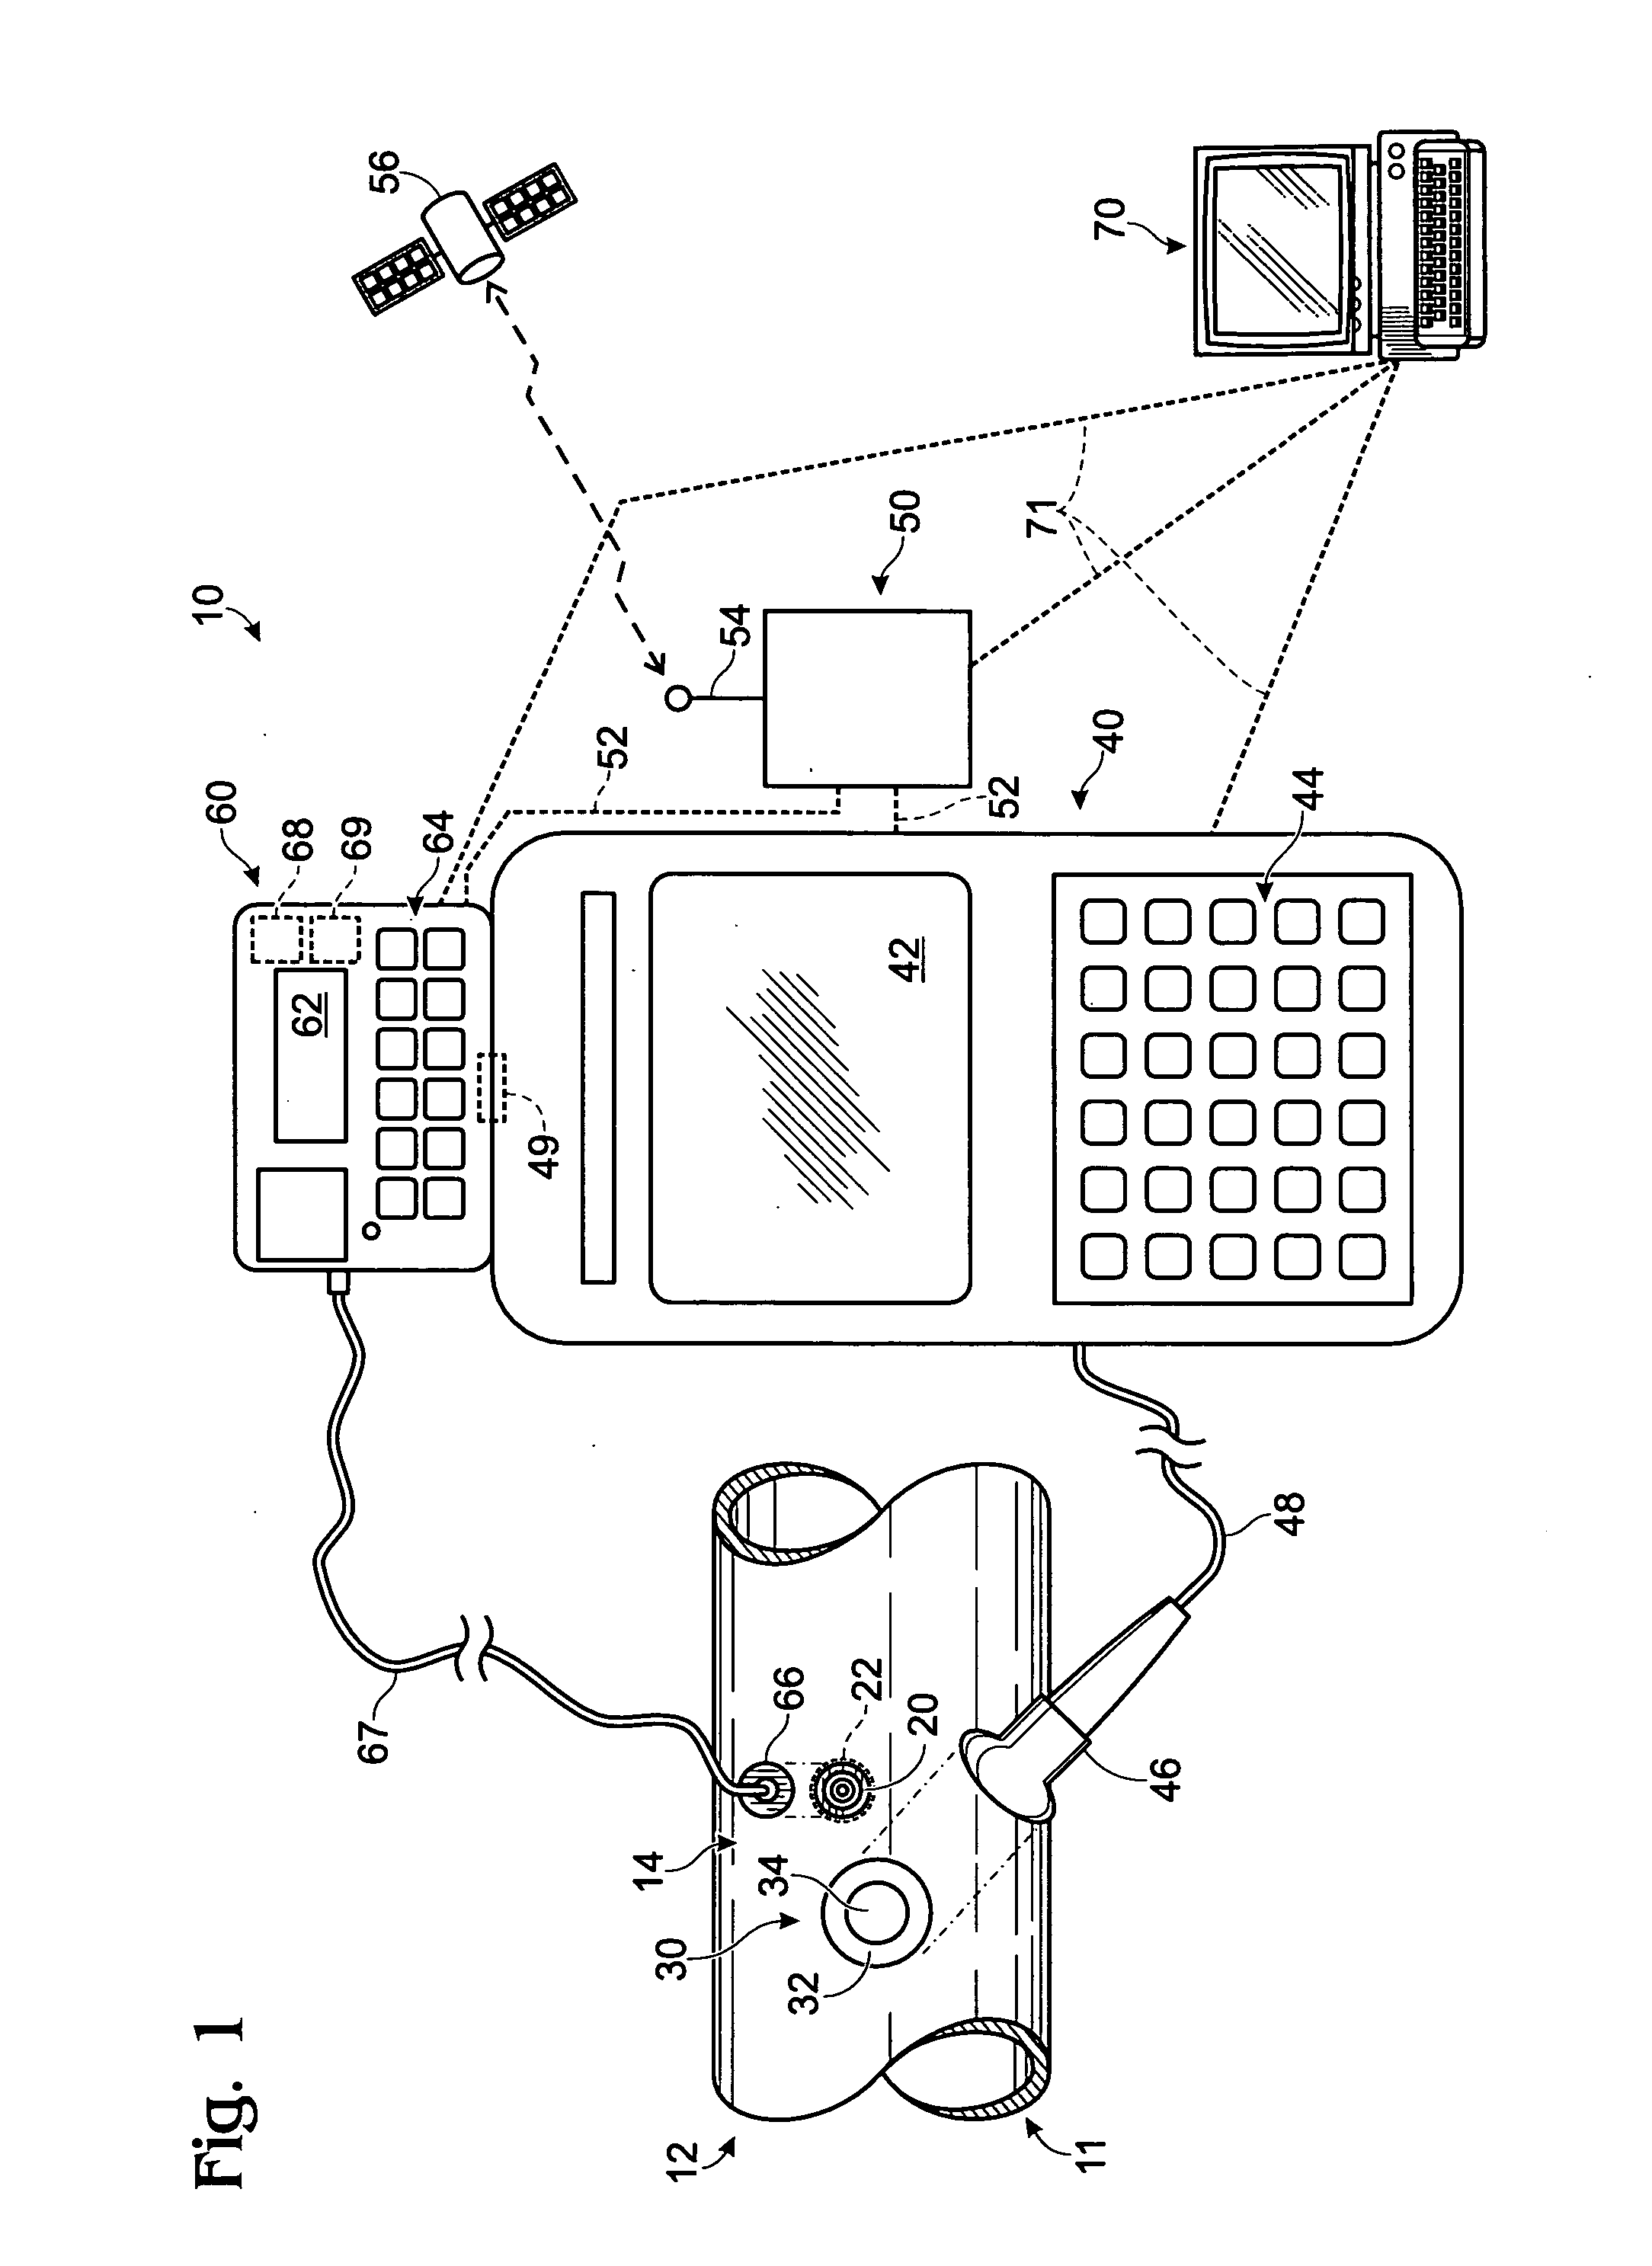 System and methods for testing, monitoring, and replacing equipment